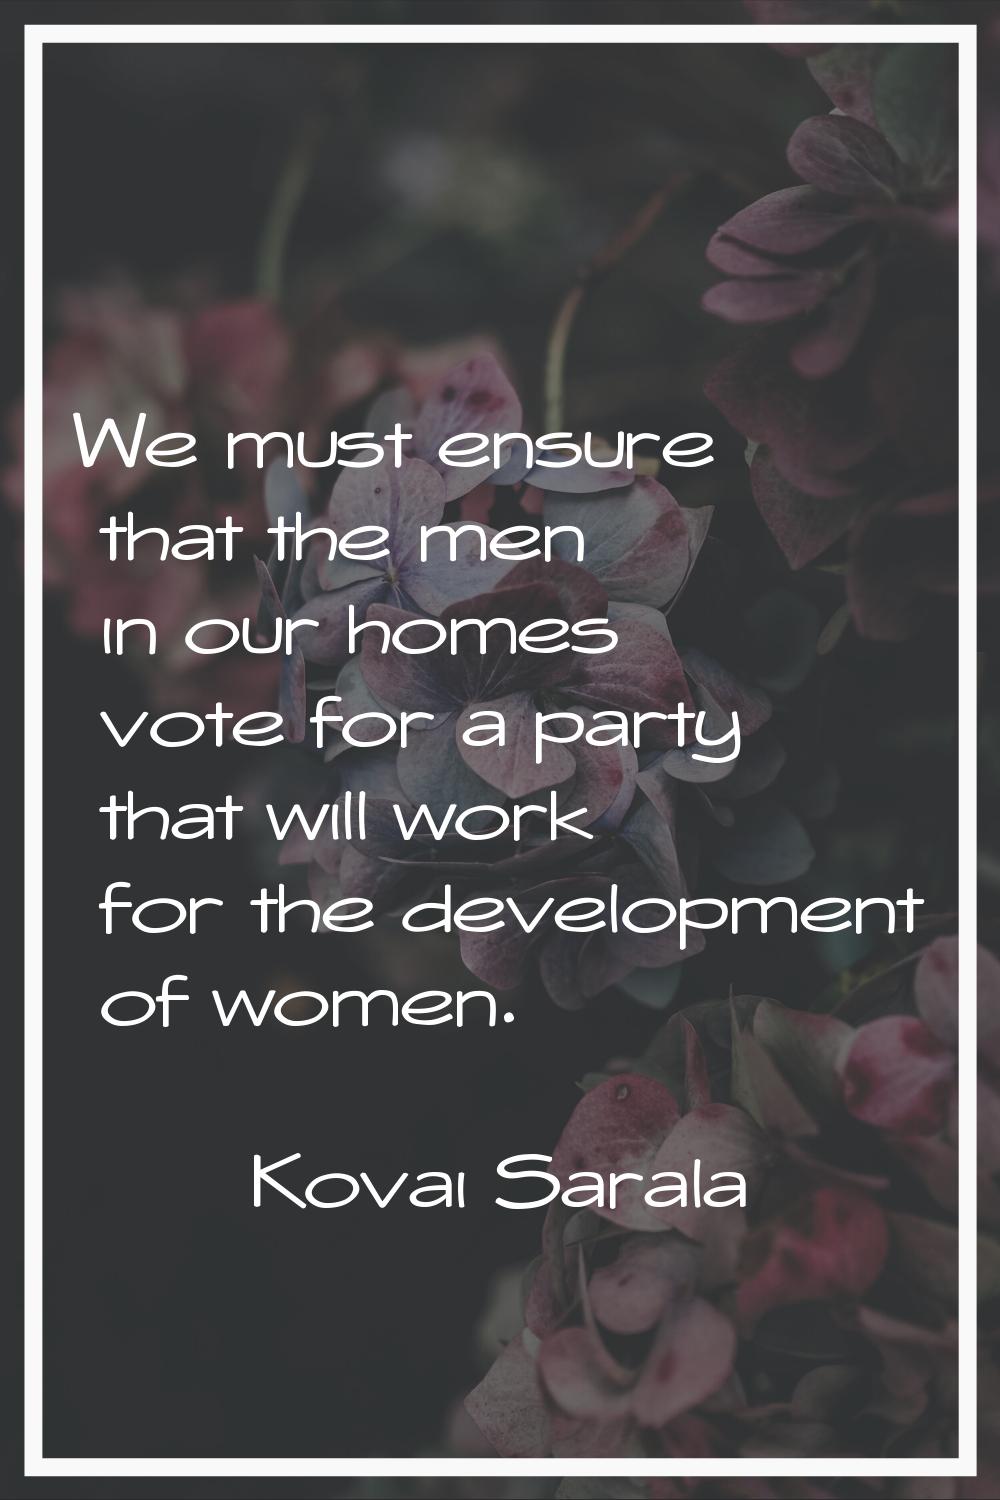 We must ensure that the men in our homes vote for a party that will work for the development of wom